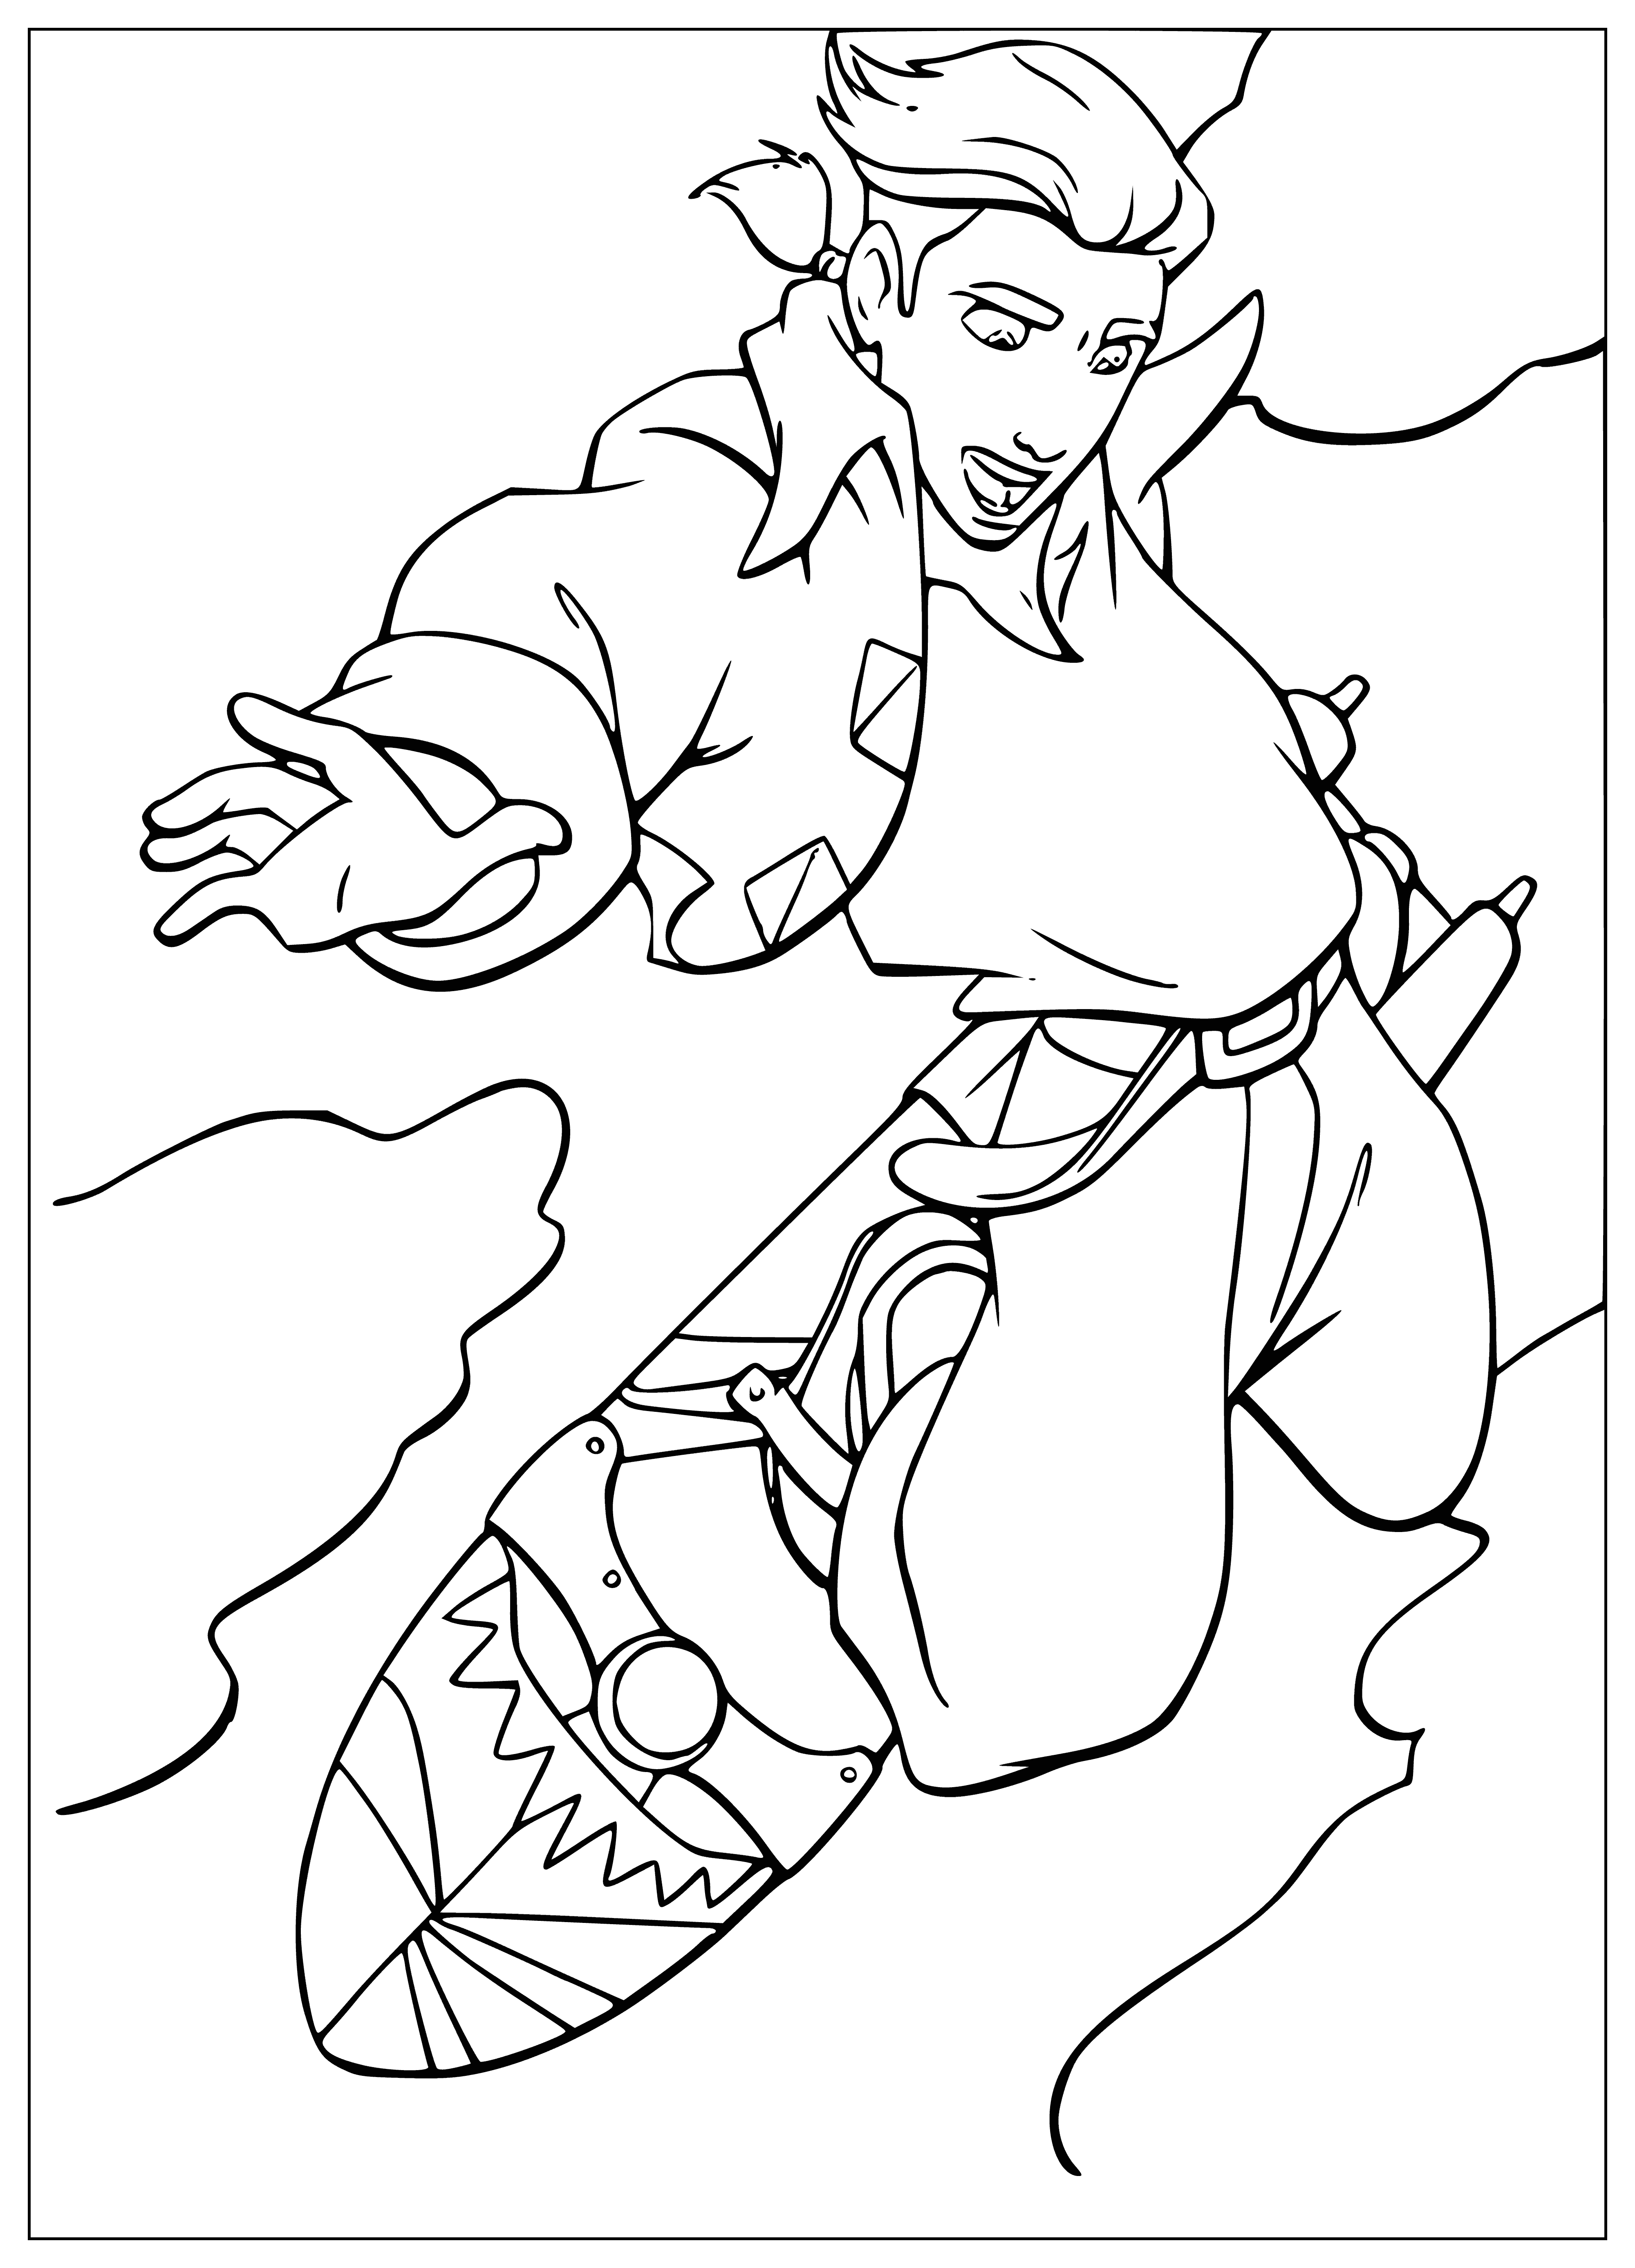 coloring page: Boy with shaggy black hair flies on board, wearing red shirt with star, blue jeans and shoes with white laces. Holding black staff with white orb.